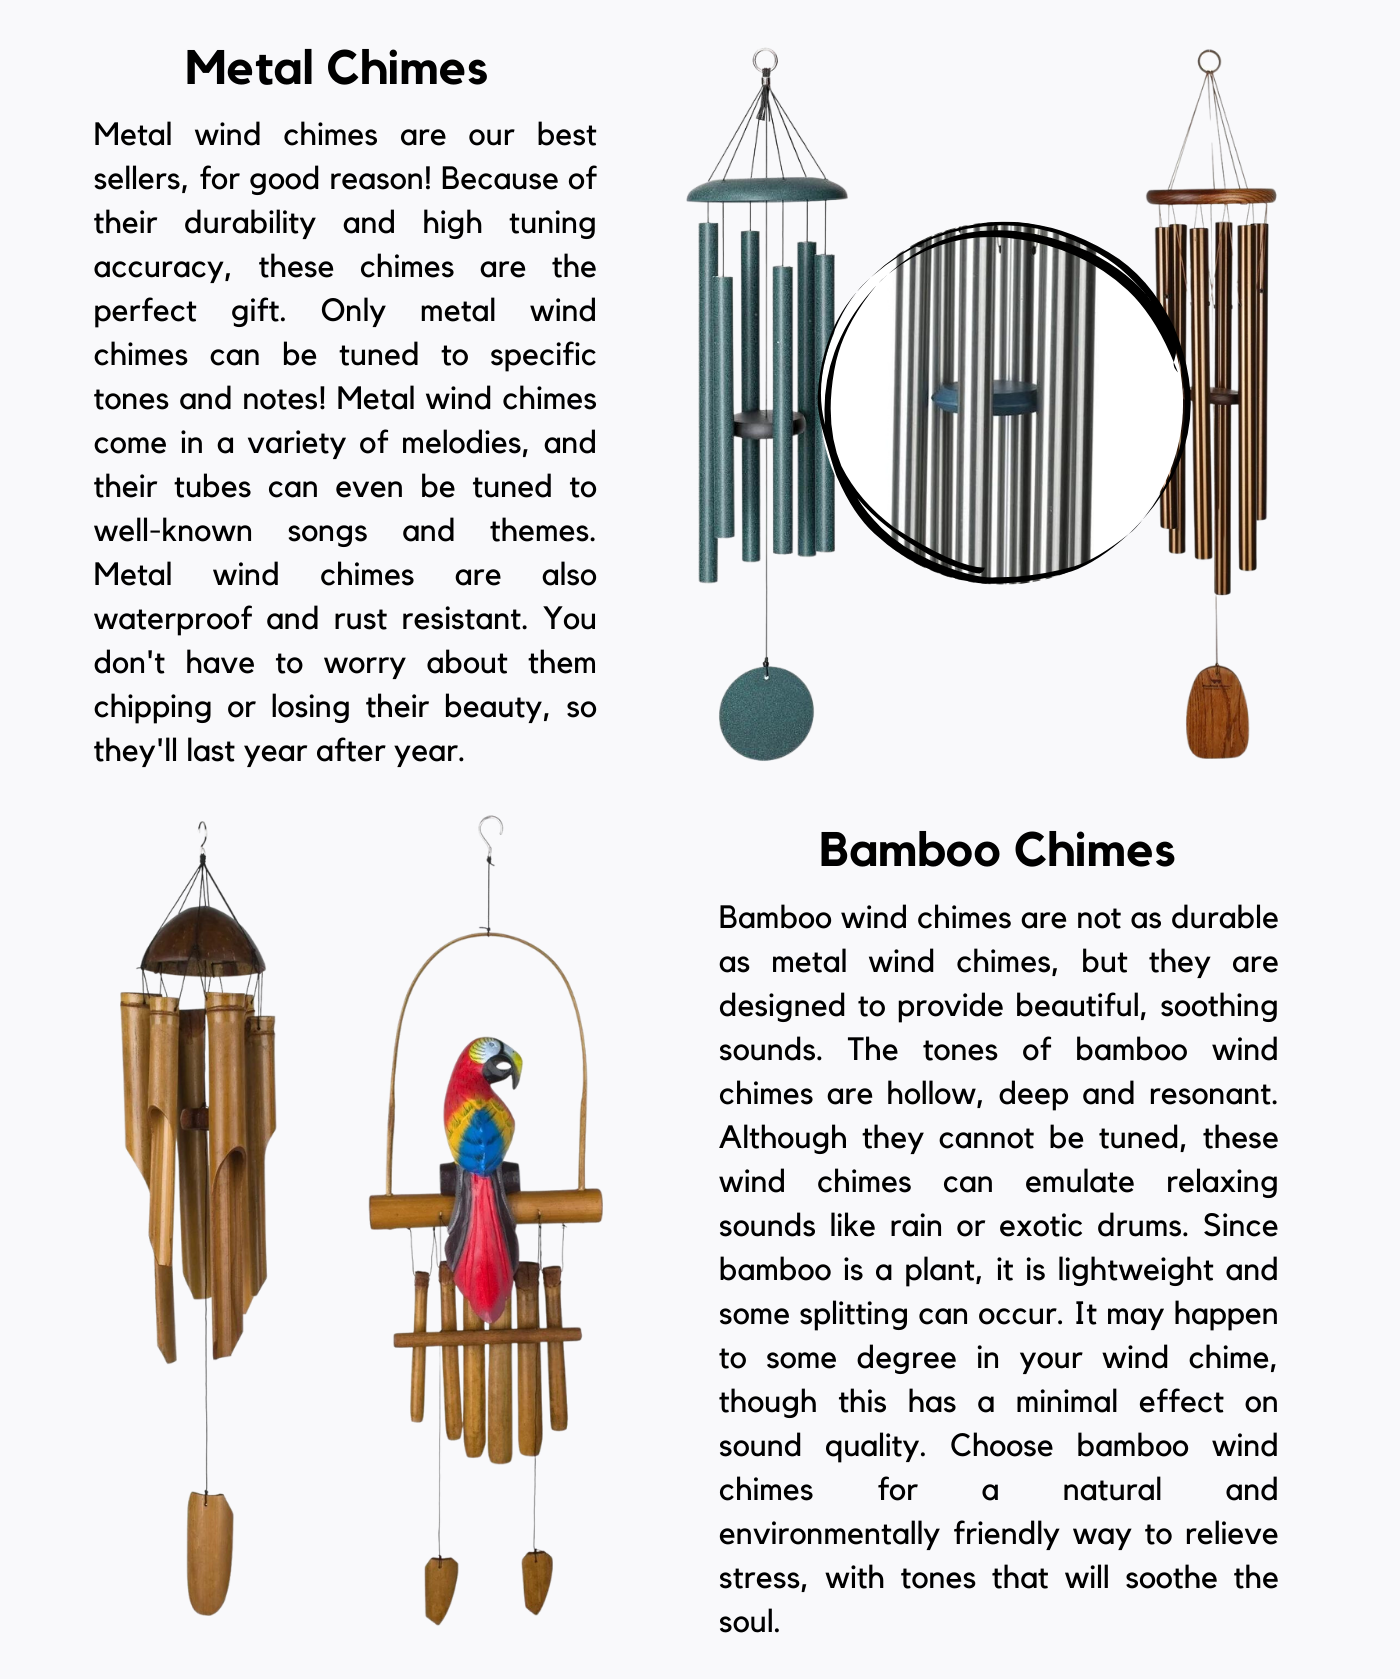 Material Metal Chimes Metal wind chimes are our best sellers, for good reason! Because of their durability and high tuning accuracy, these chimes are the perfect gift. Only metal wind chimes can be tuned to specific tones and notes! Metal wind chimes come in a variety of melodies, and their tubes can even be tuned to well-known songs and themes. Metal wind chimes are also waterproof and rust resistant. You don't have to worry about them chipping or losing their beauty, so they'll last year after year. Bamboo Chimes Bamboo wind chimes are not as durable as metal wind chimes, but they are designed to provide beautiful, soothing sounds. The tones of bamboo wind chimes are hollow, deep and resonant. Although they cannot be tuned, these wind chimes can emulate relaxing sounds like rain or exotic drums. Since bamboo is a plant, it is lightweight and some splitting can occur. It may happen to some degree in your wind chime, though this has a minimal effect on sound quality. Choose bamboo wind chimes for a natural and environmentally friendly way to relieve stress, with tones that will soothe the soul.